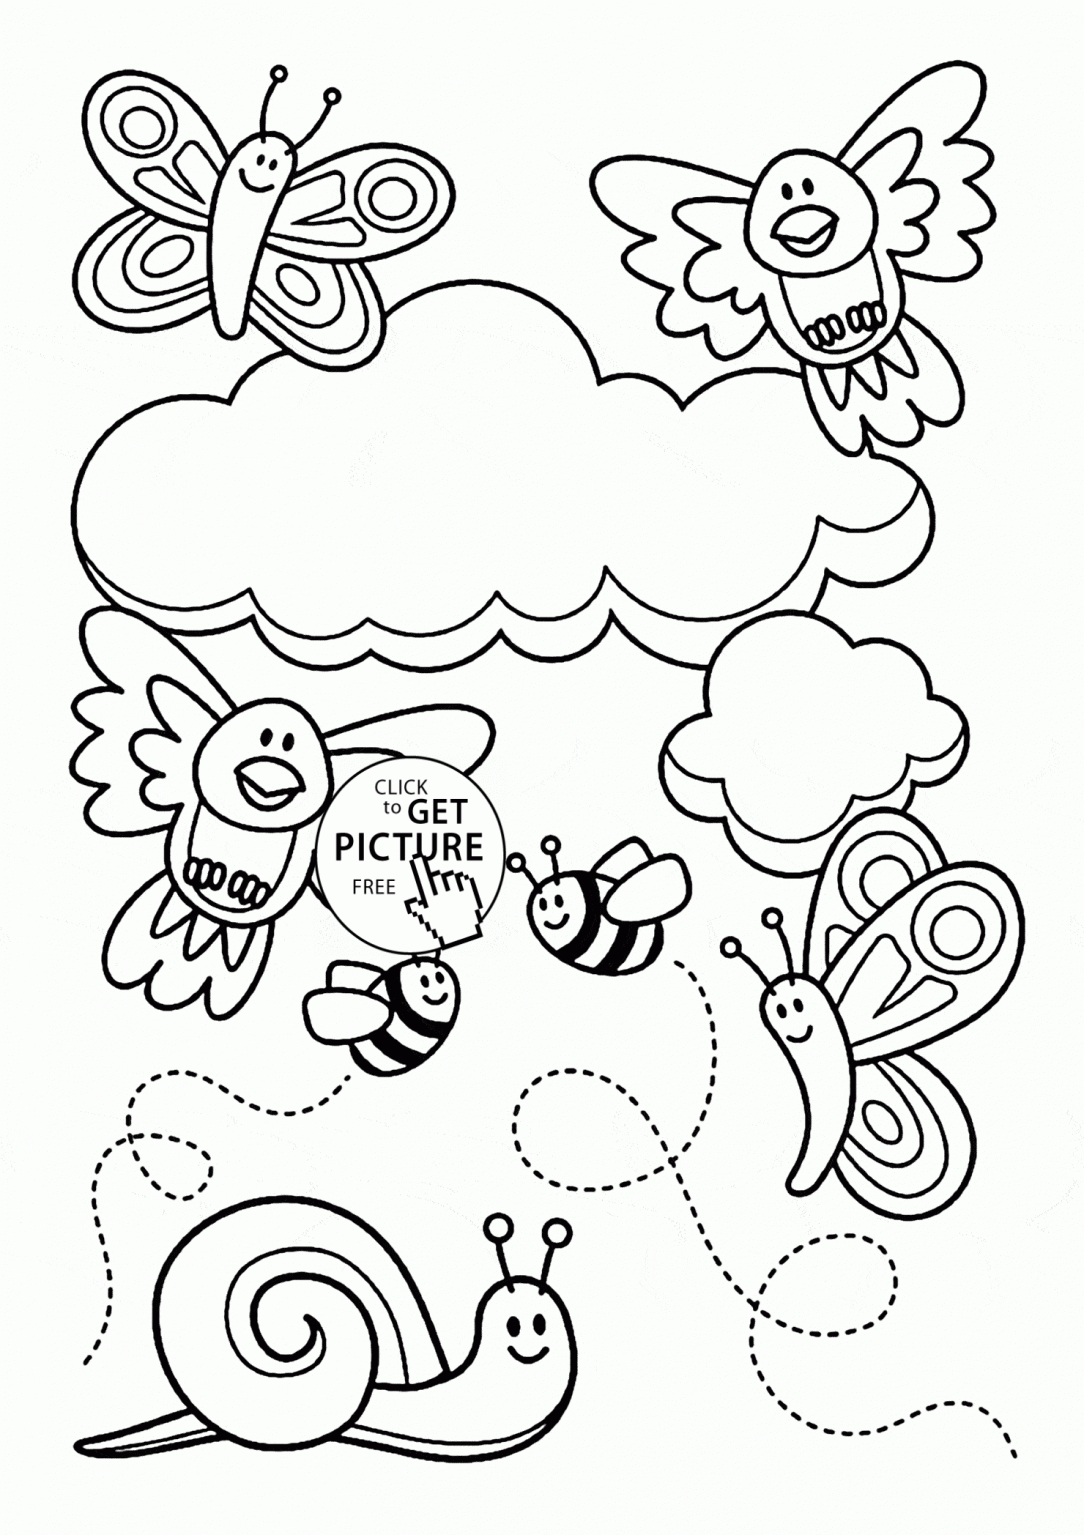 Spring Coloring Pages For Toddlers April Coloring Pages For Toddlers Fools Sheets Spring Adults